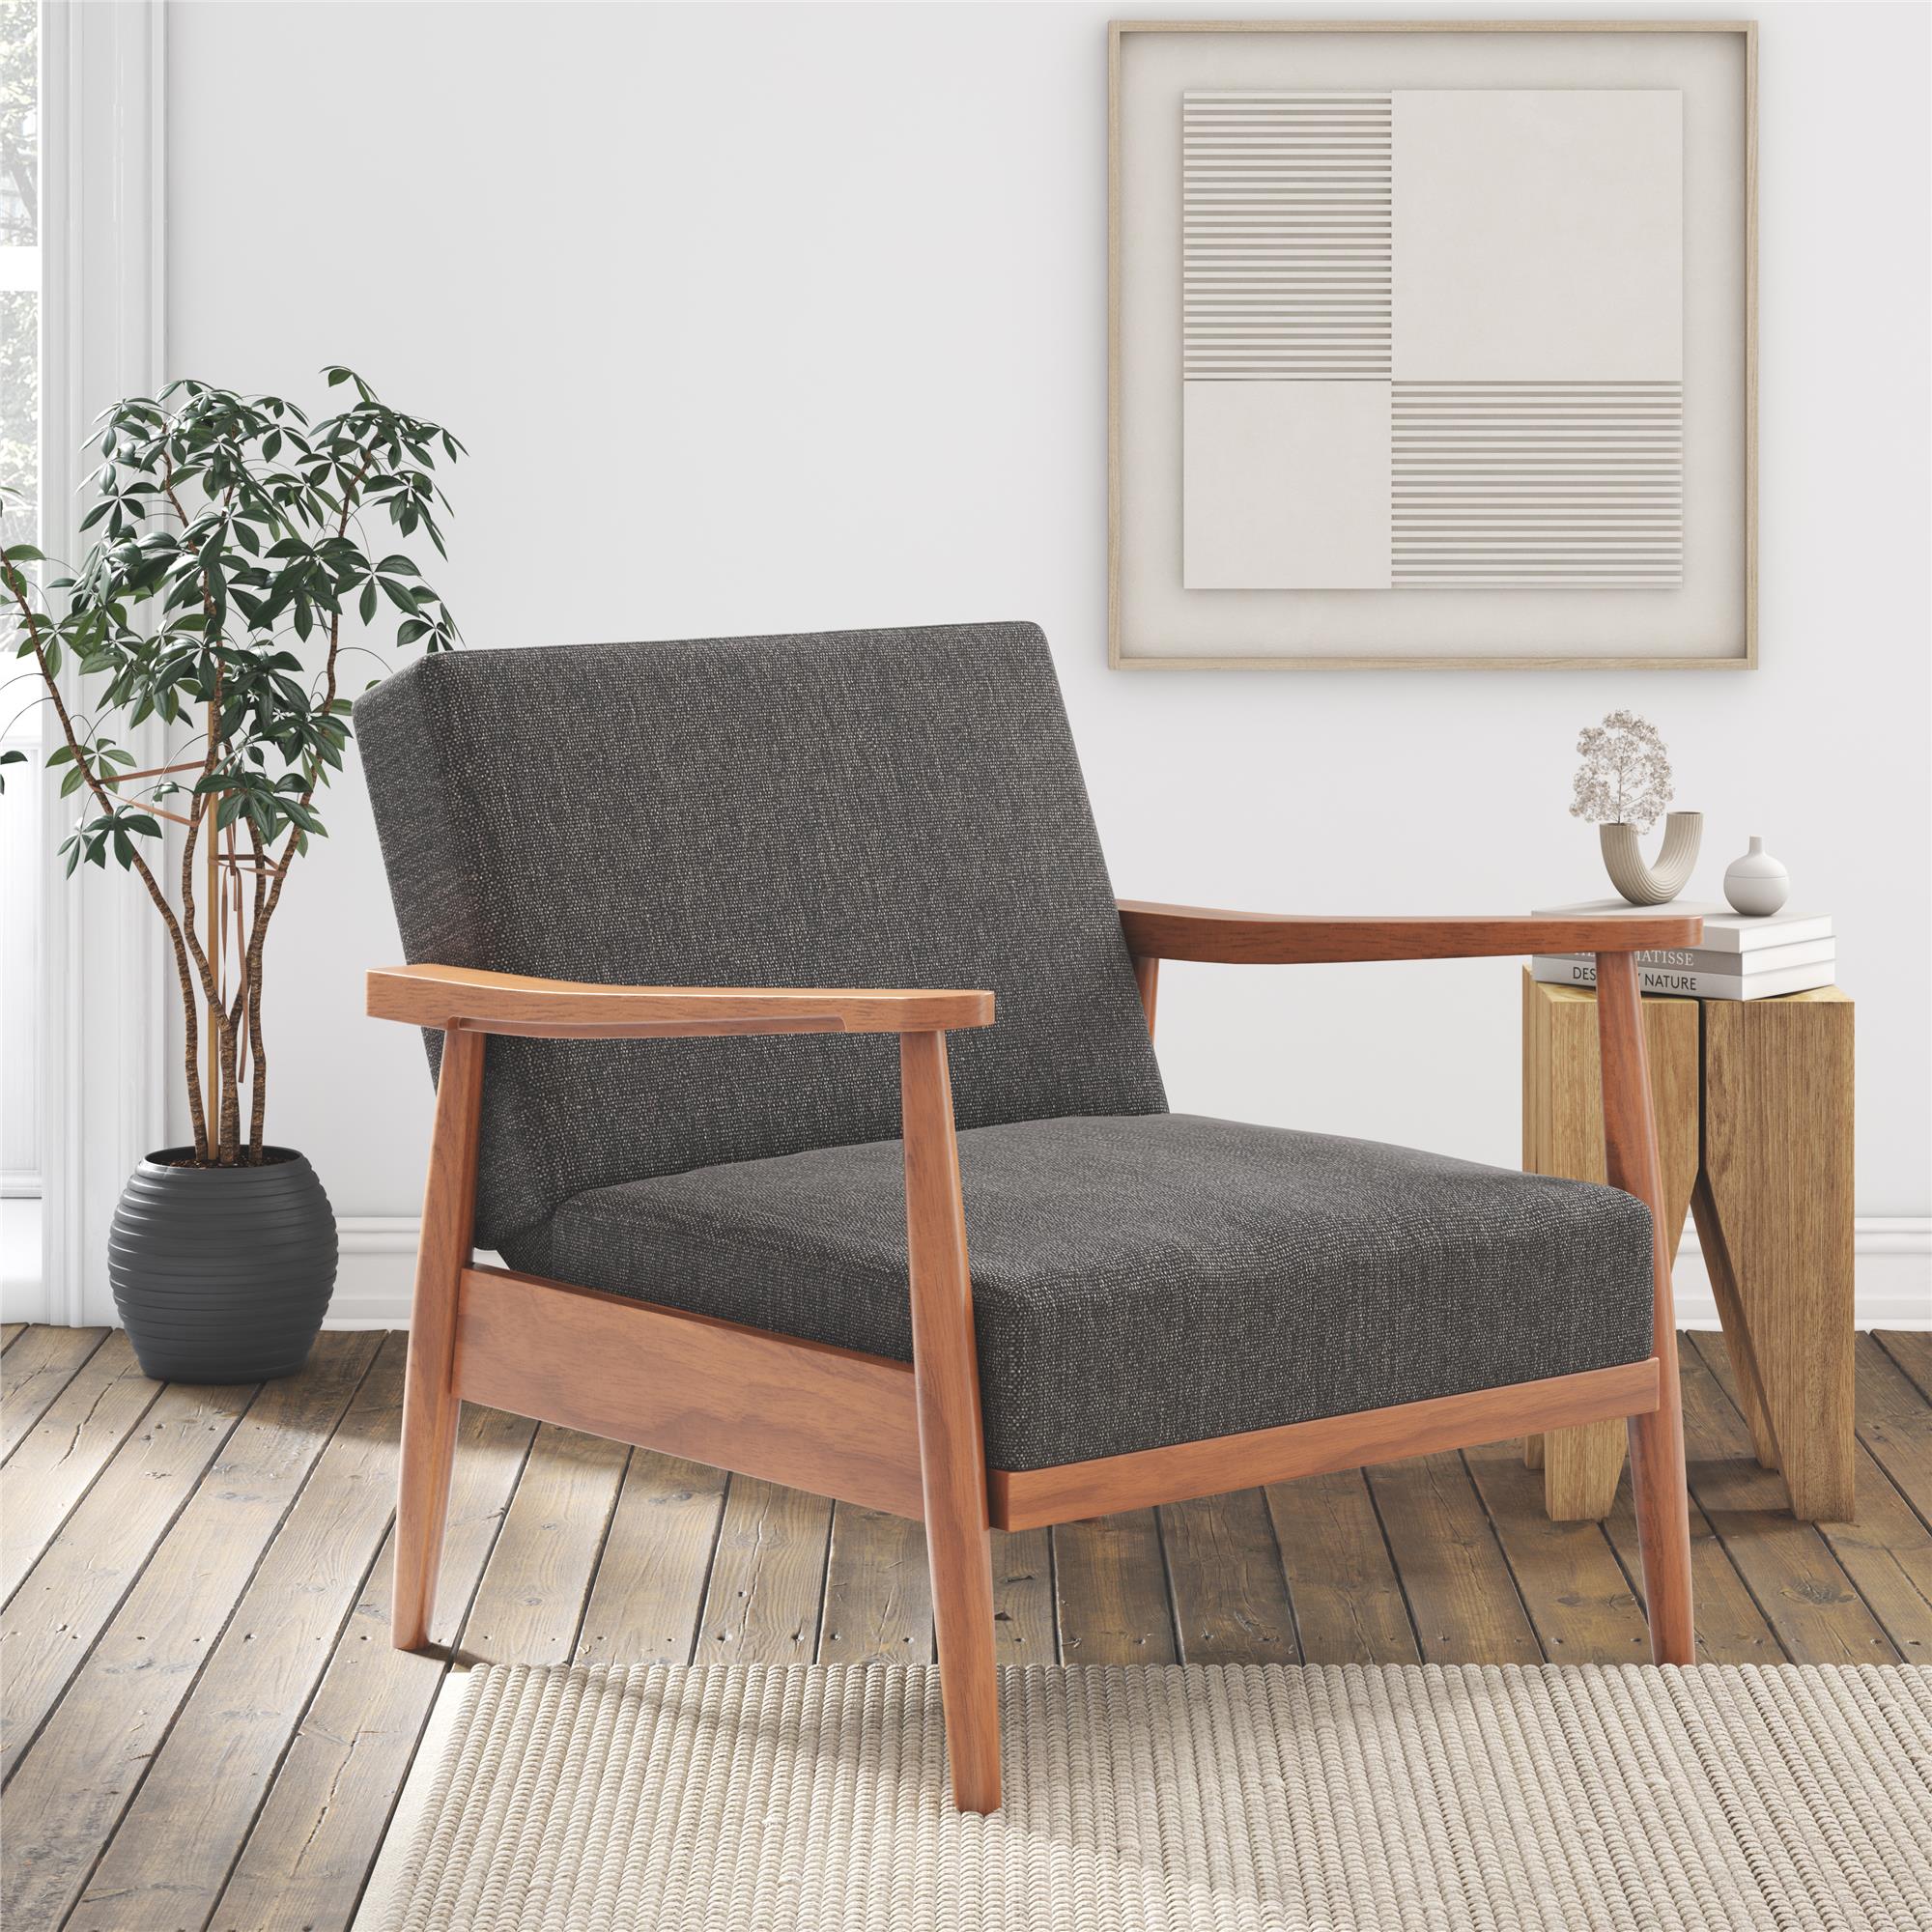 Better Homes & Gardens Mid Century Chair - image 1 of 22